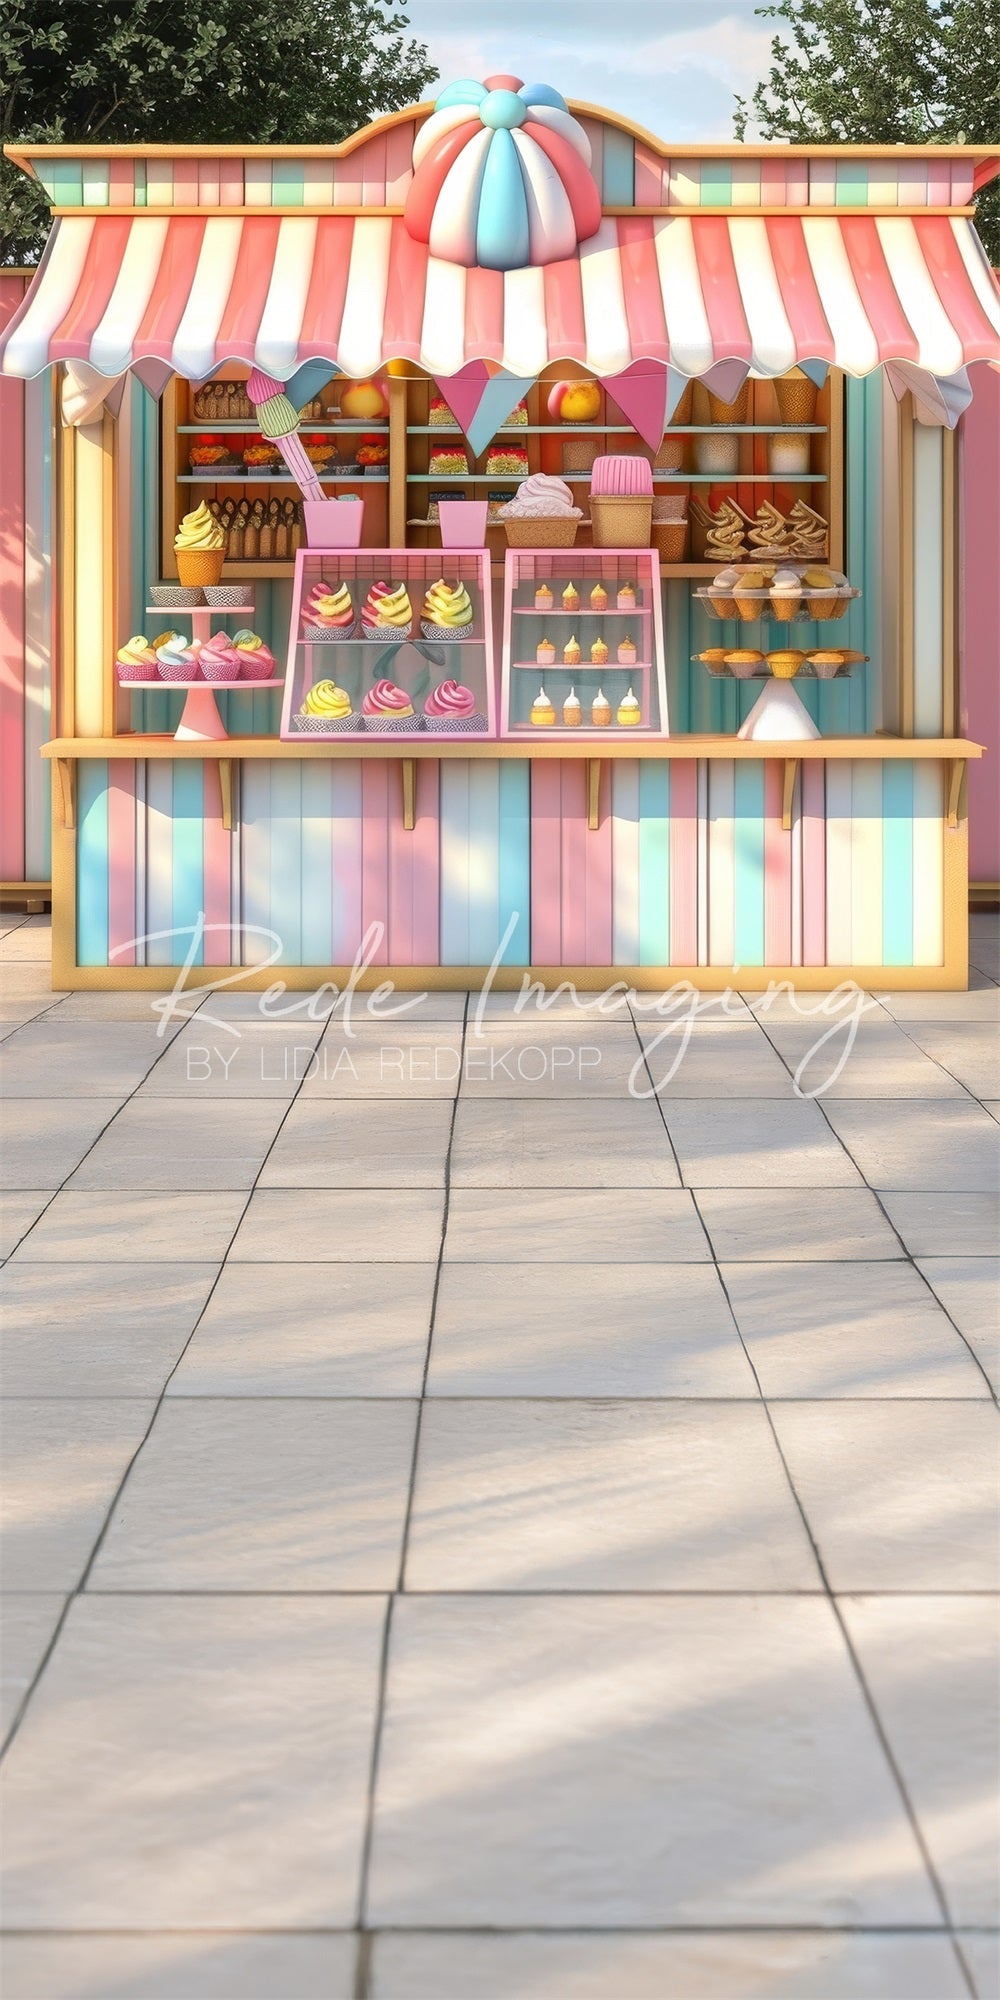 TEST Kate Sweep Carnival Sweet Colorful Ice Cream Store Backdrop Designed by Lidia Redekopp